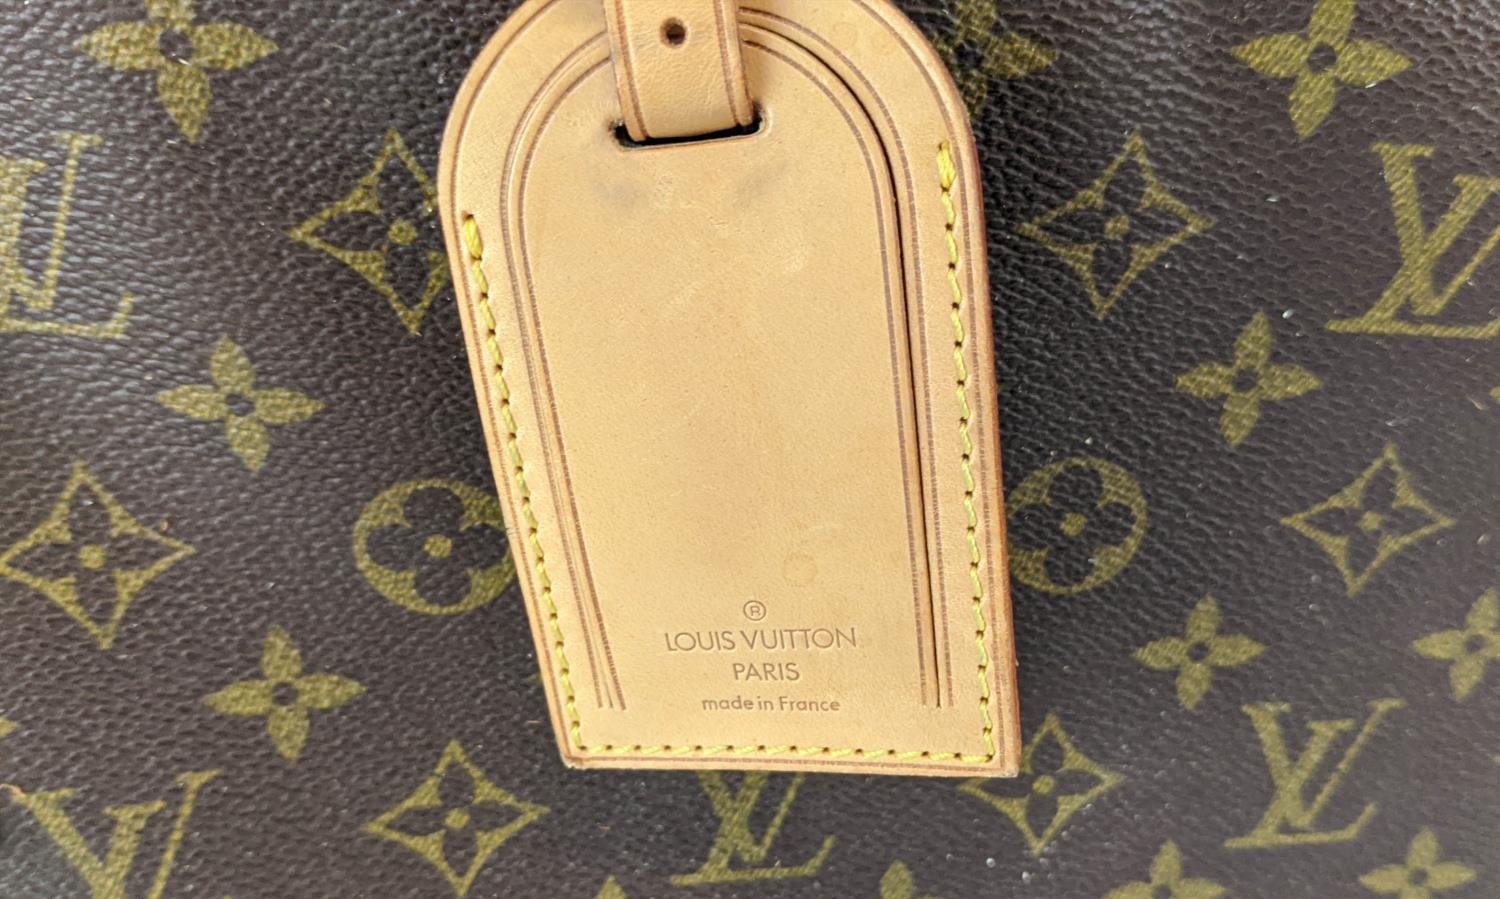 LOUIS VUITTON SATELLITE 70 SUITCASE, monogram canvas and leather, brass hardware, double buckle - Image 4 of 8